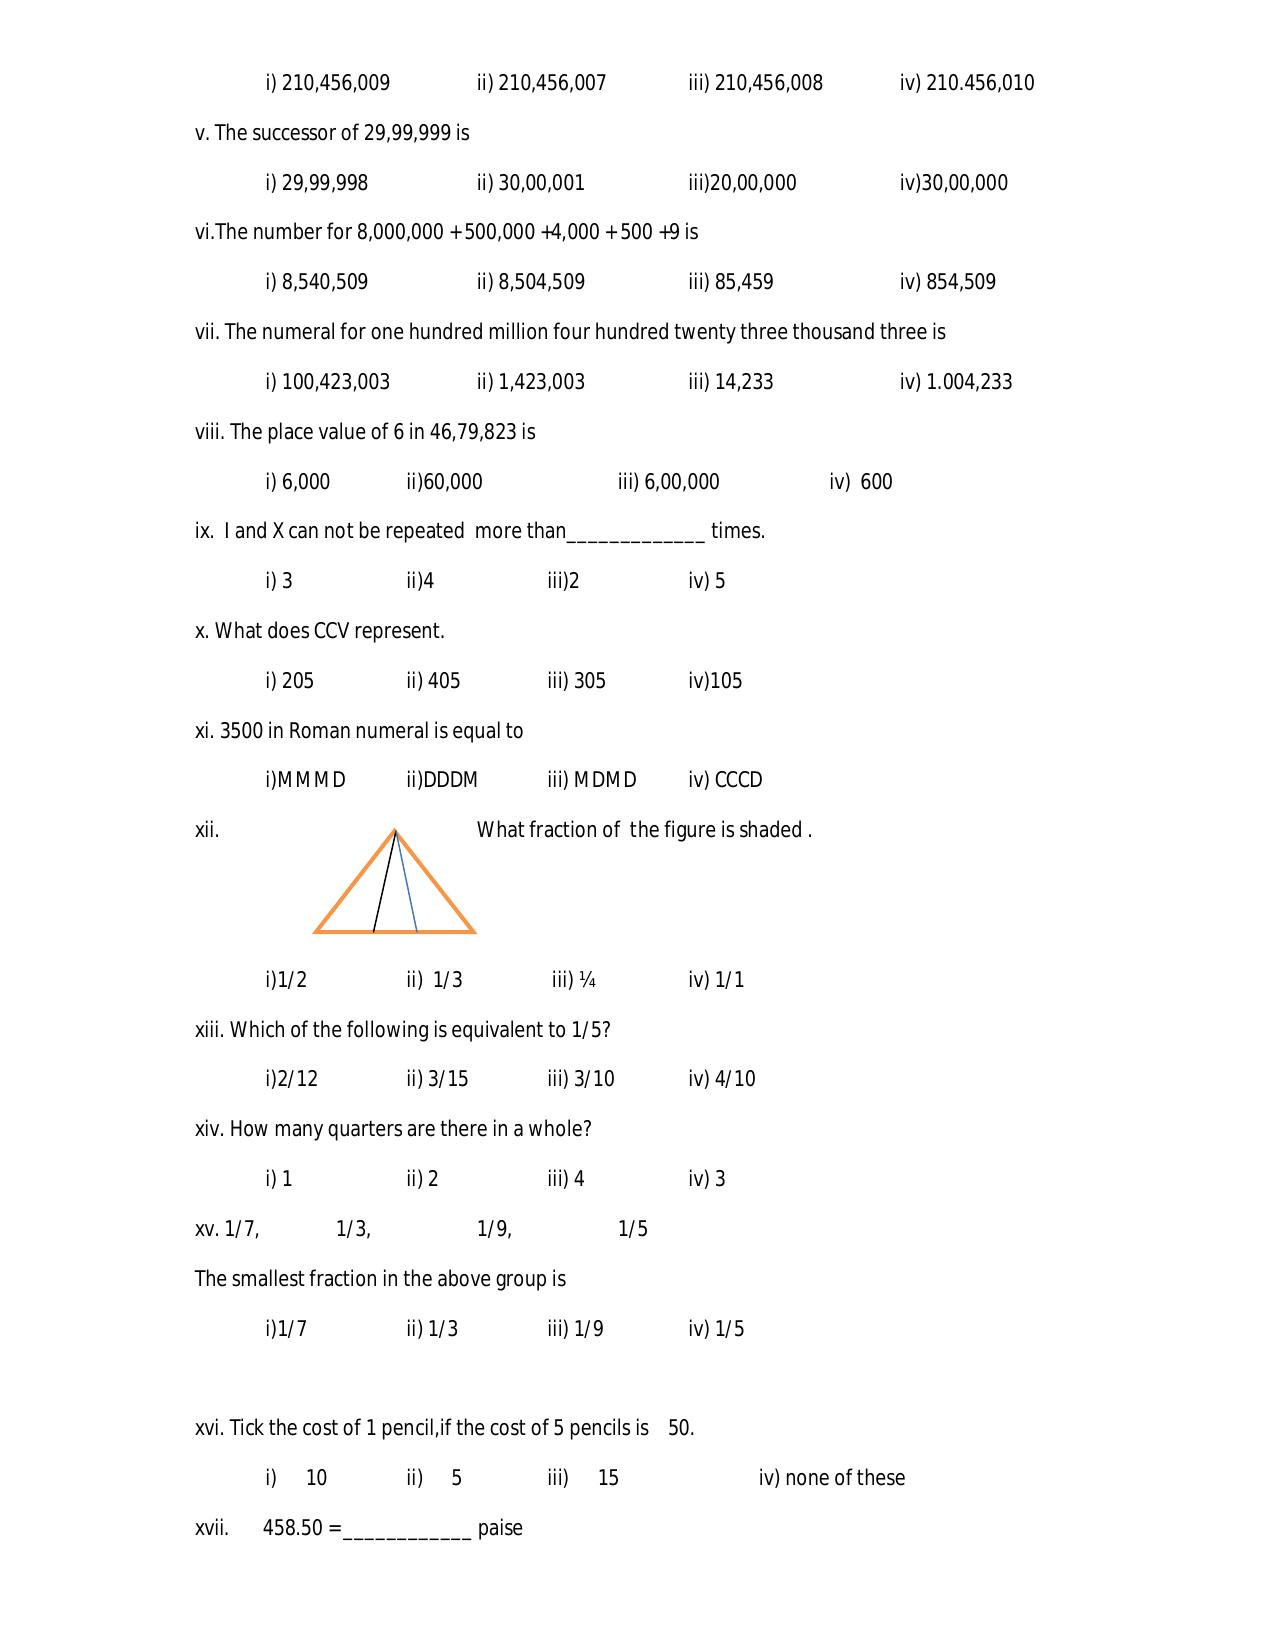 Worksheet for Class 5 Maths Assignment 15 - Page 2